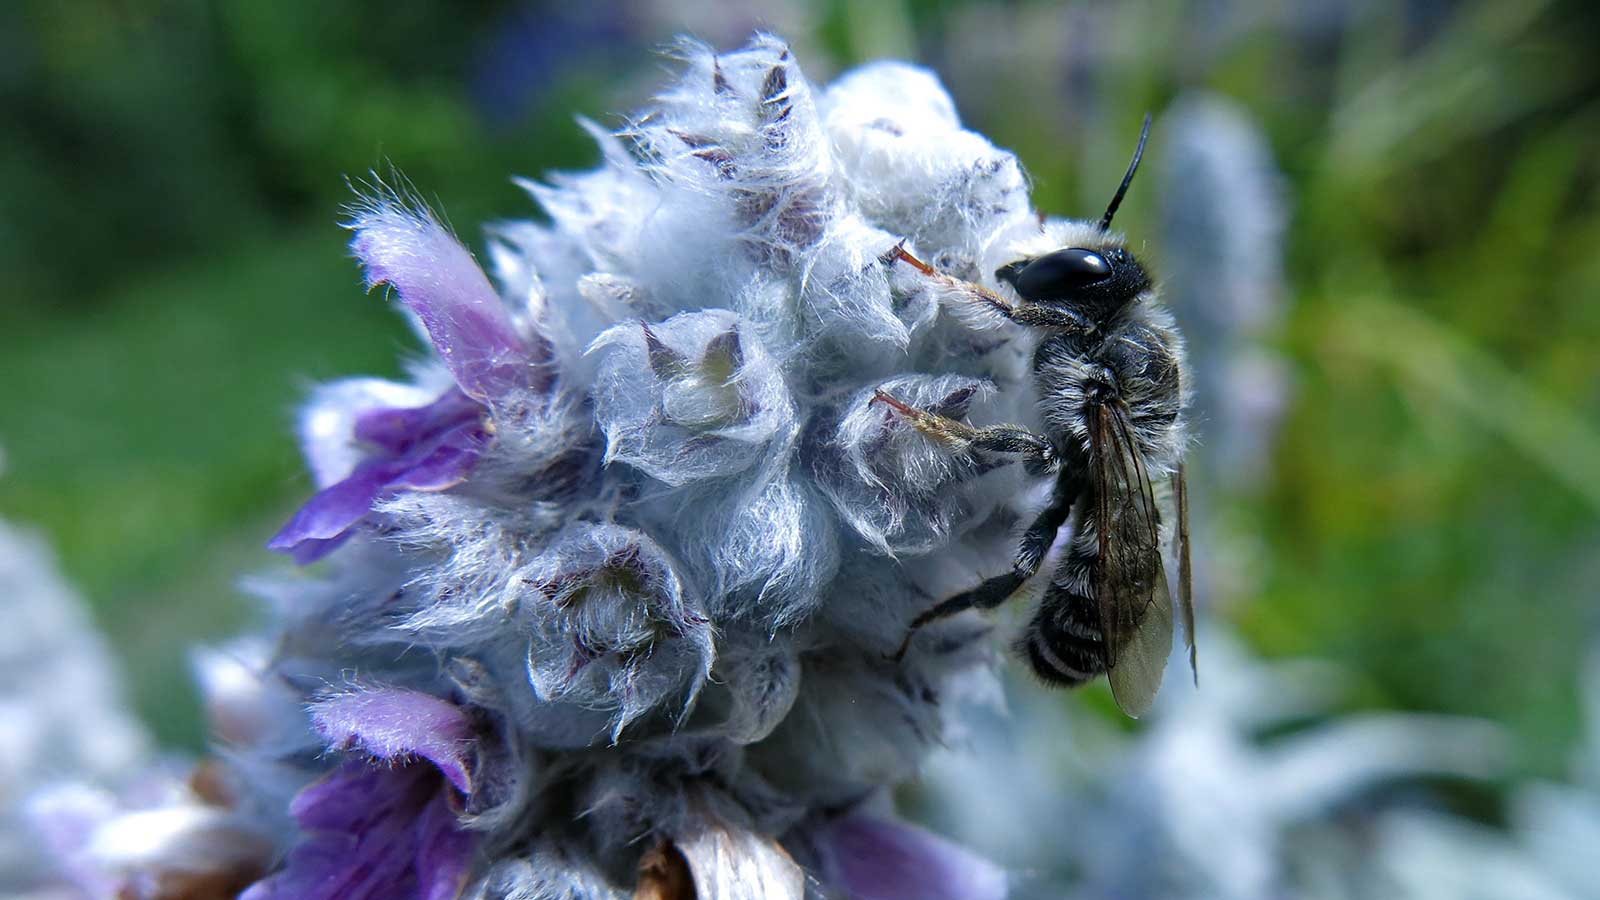 Stachys Big Ears attracts numerous beneficial pollinators like hummingbirds and bees. Some species of bees use the furry leaves of Lamb’s Ear plants to make nests. Its fuzz also attracts condensed water which small insects drink.